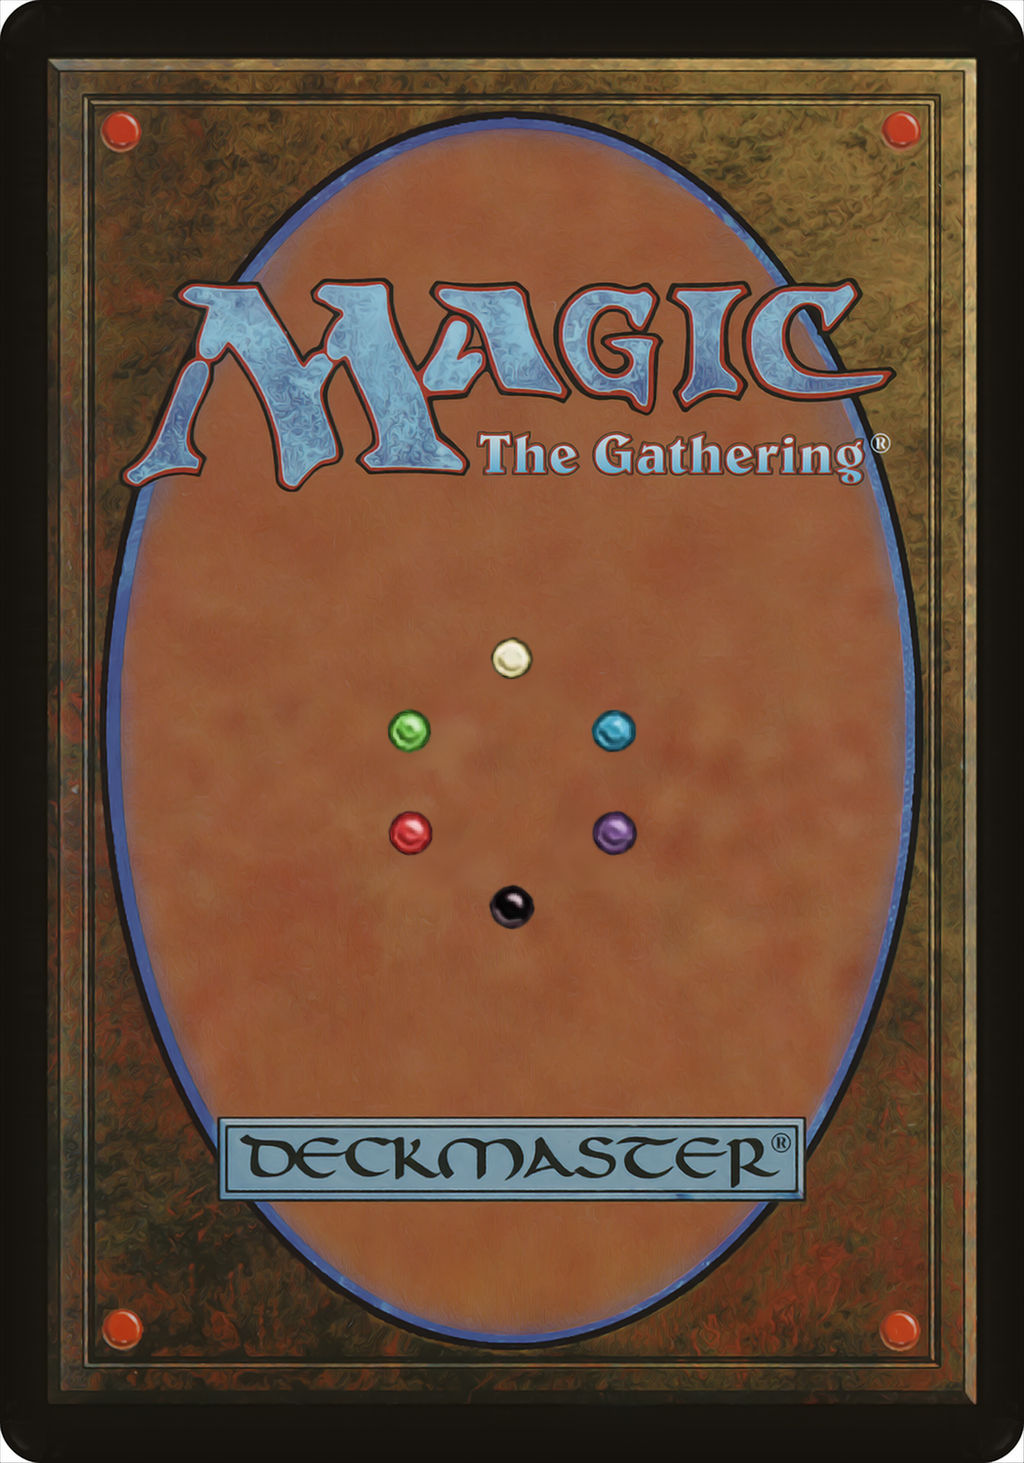 magic-the-gathering-six-color-card-back-by-lordnyriox-on-deviantart